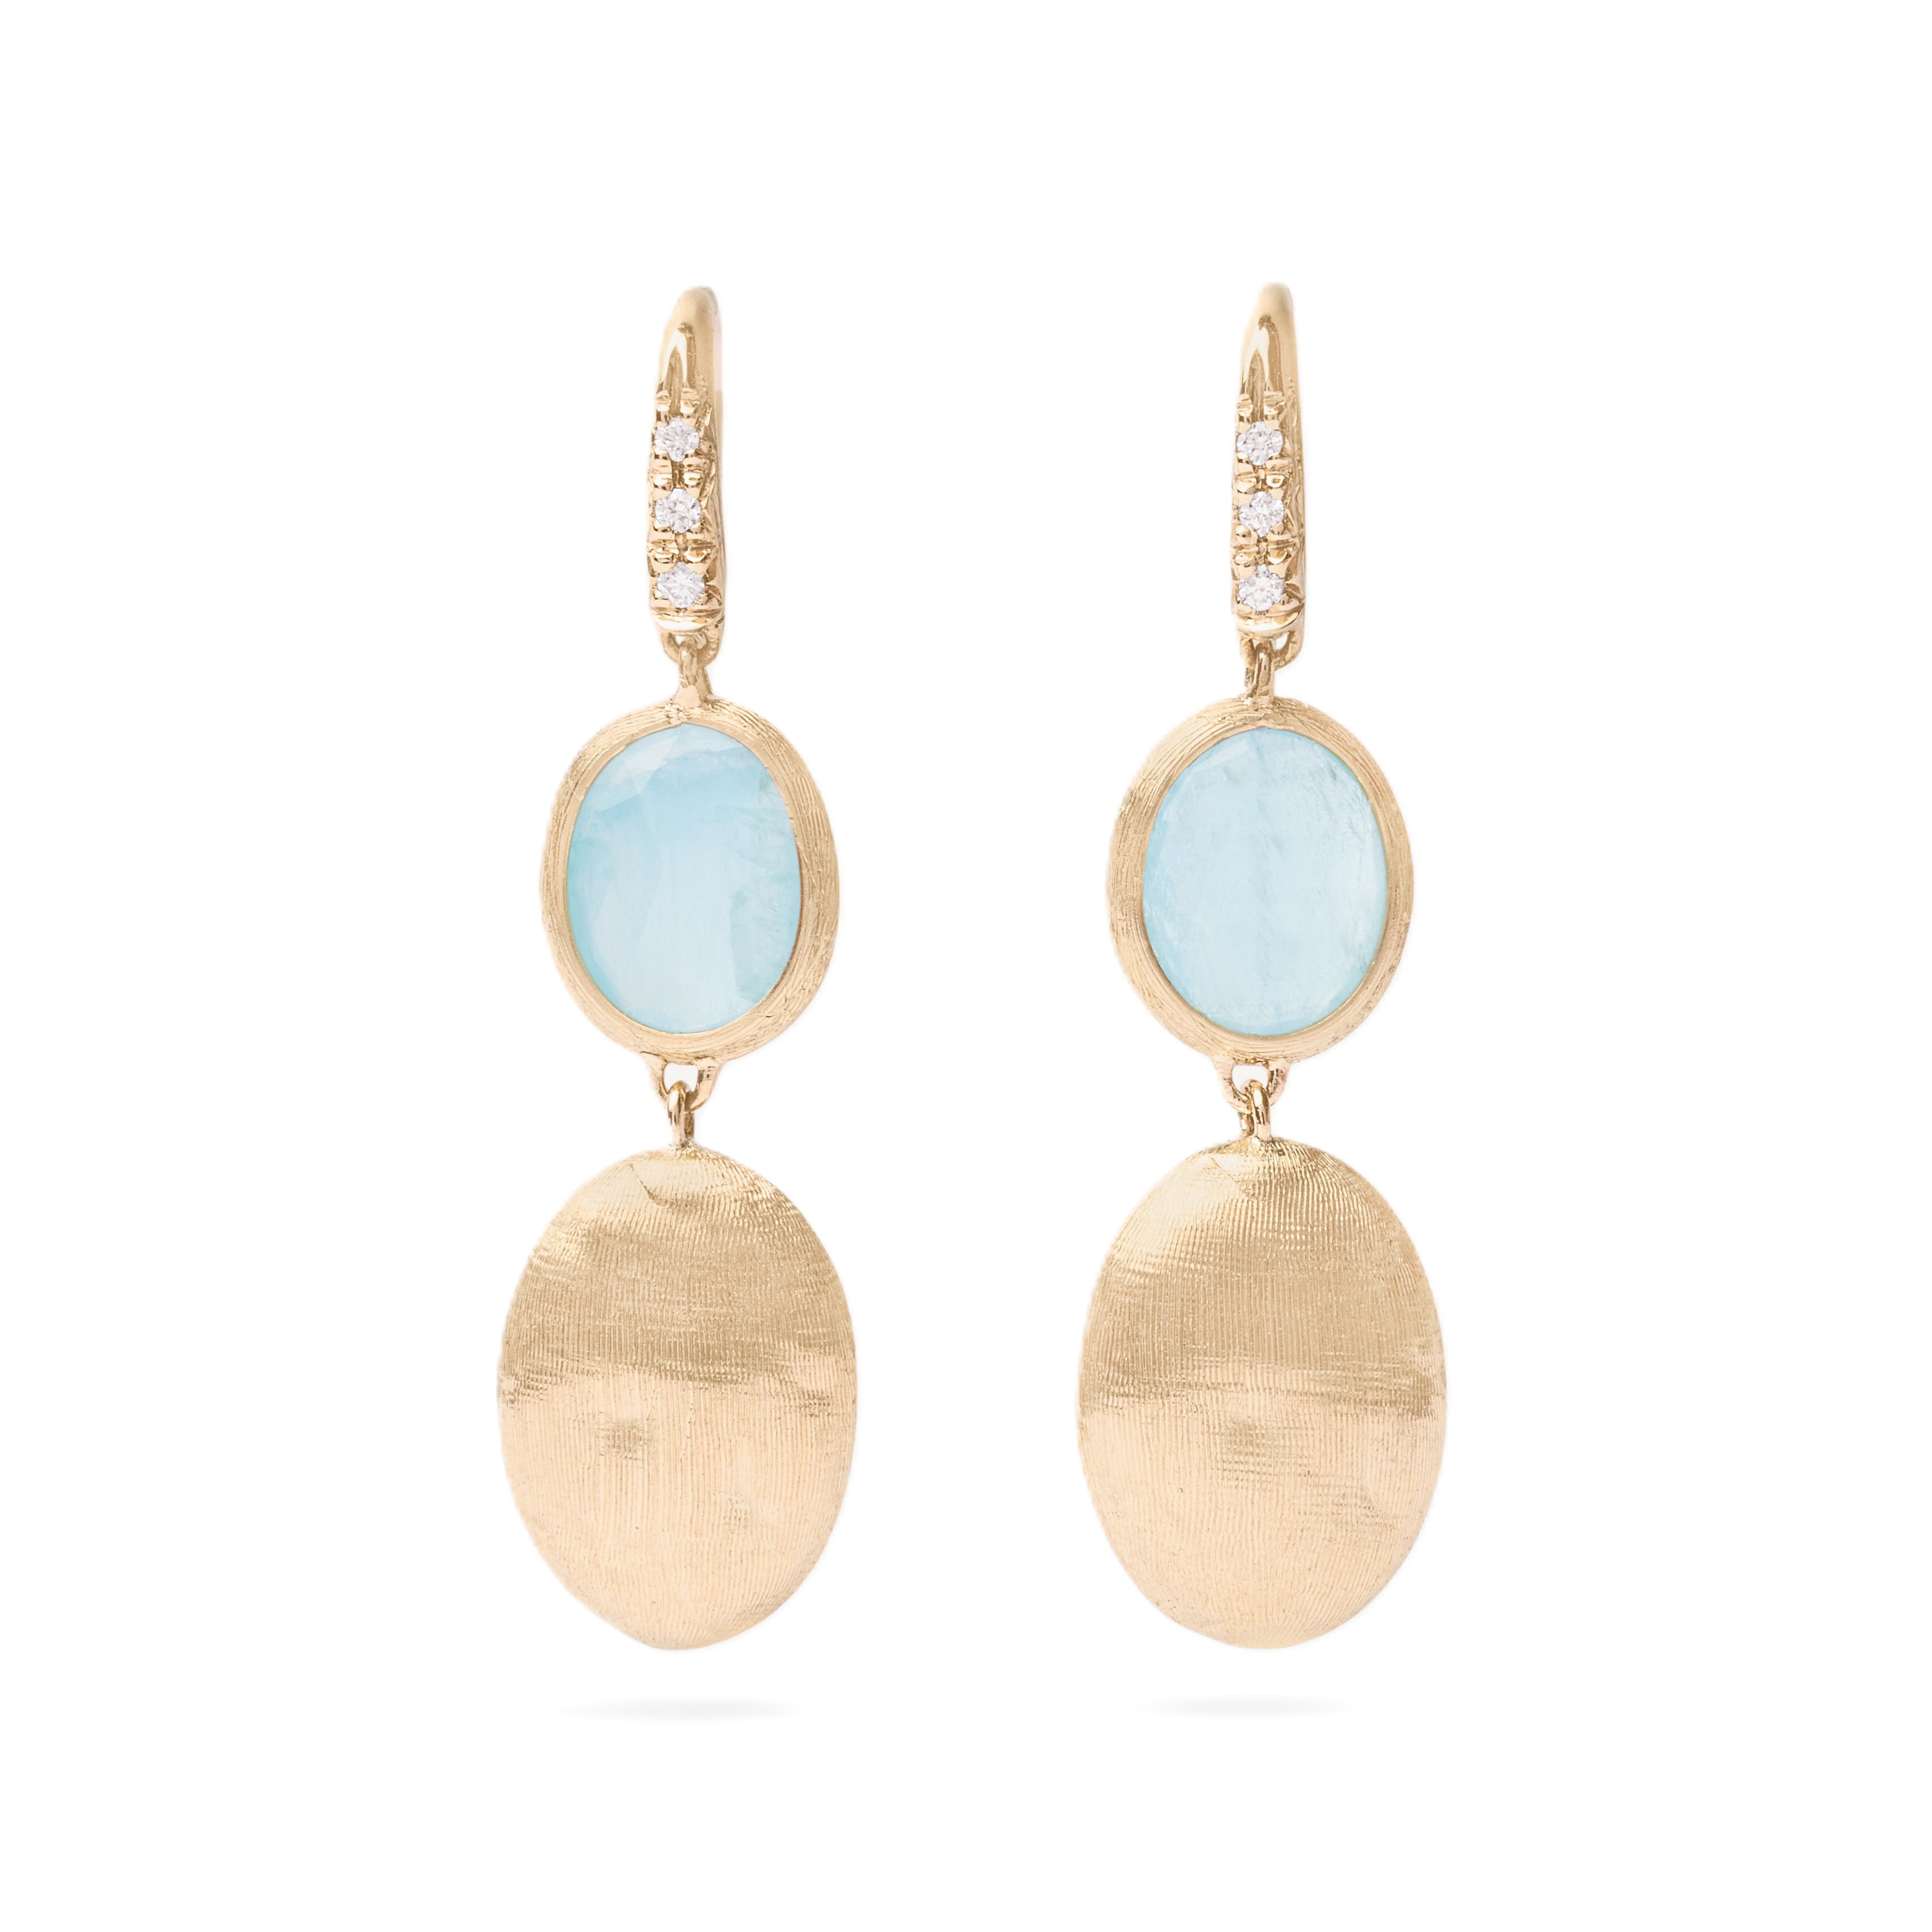 Marco Bicego Siviglia Drop Earrings in 18K yellow gold with aquamarine and diamond accent weighing 0.05 carat total weight